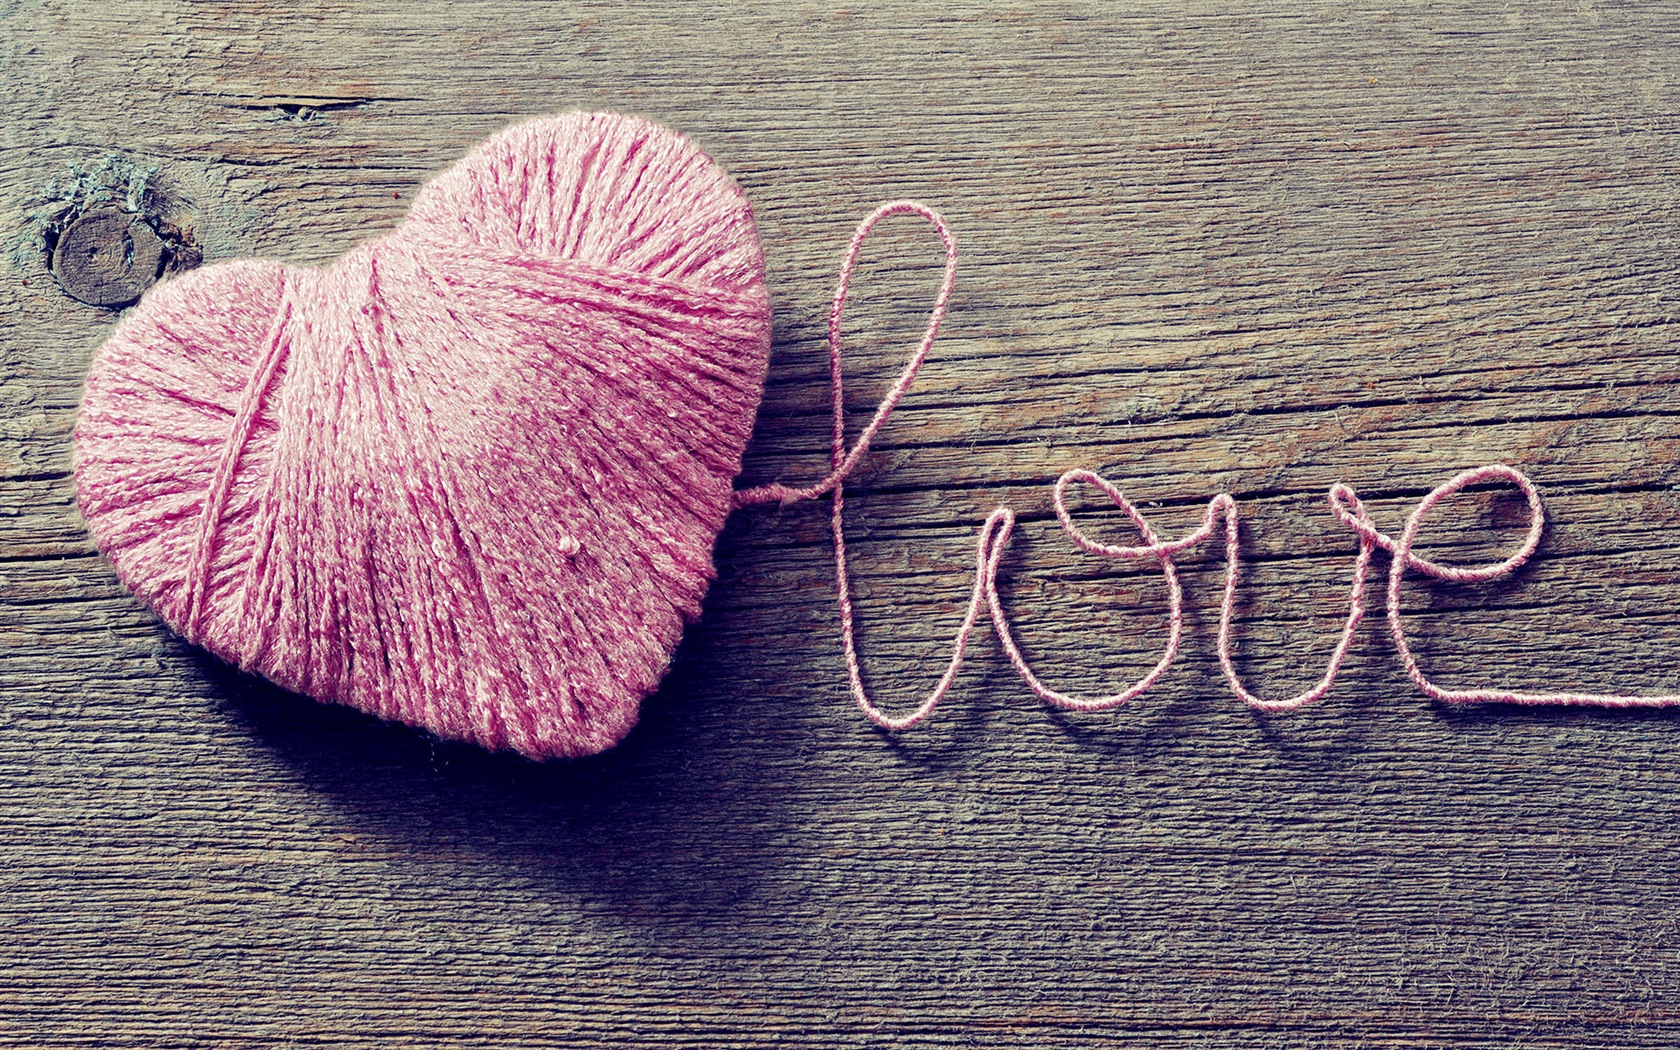 The theme of love, creative heart-shaped HD wallpapers #10 - 1680x1050